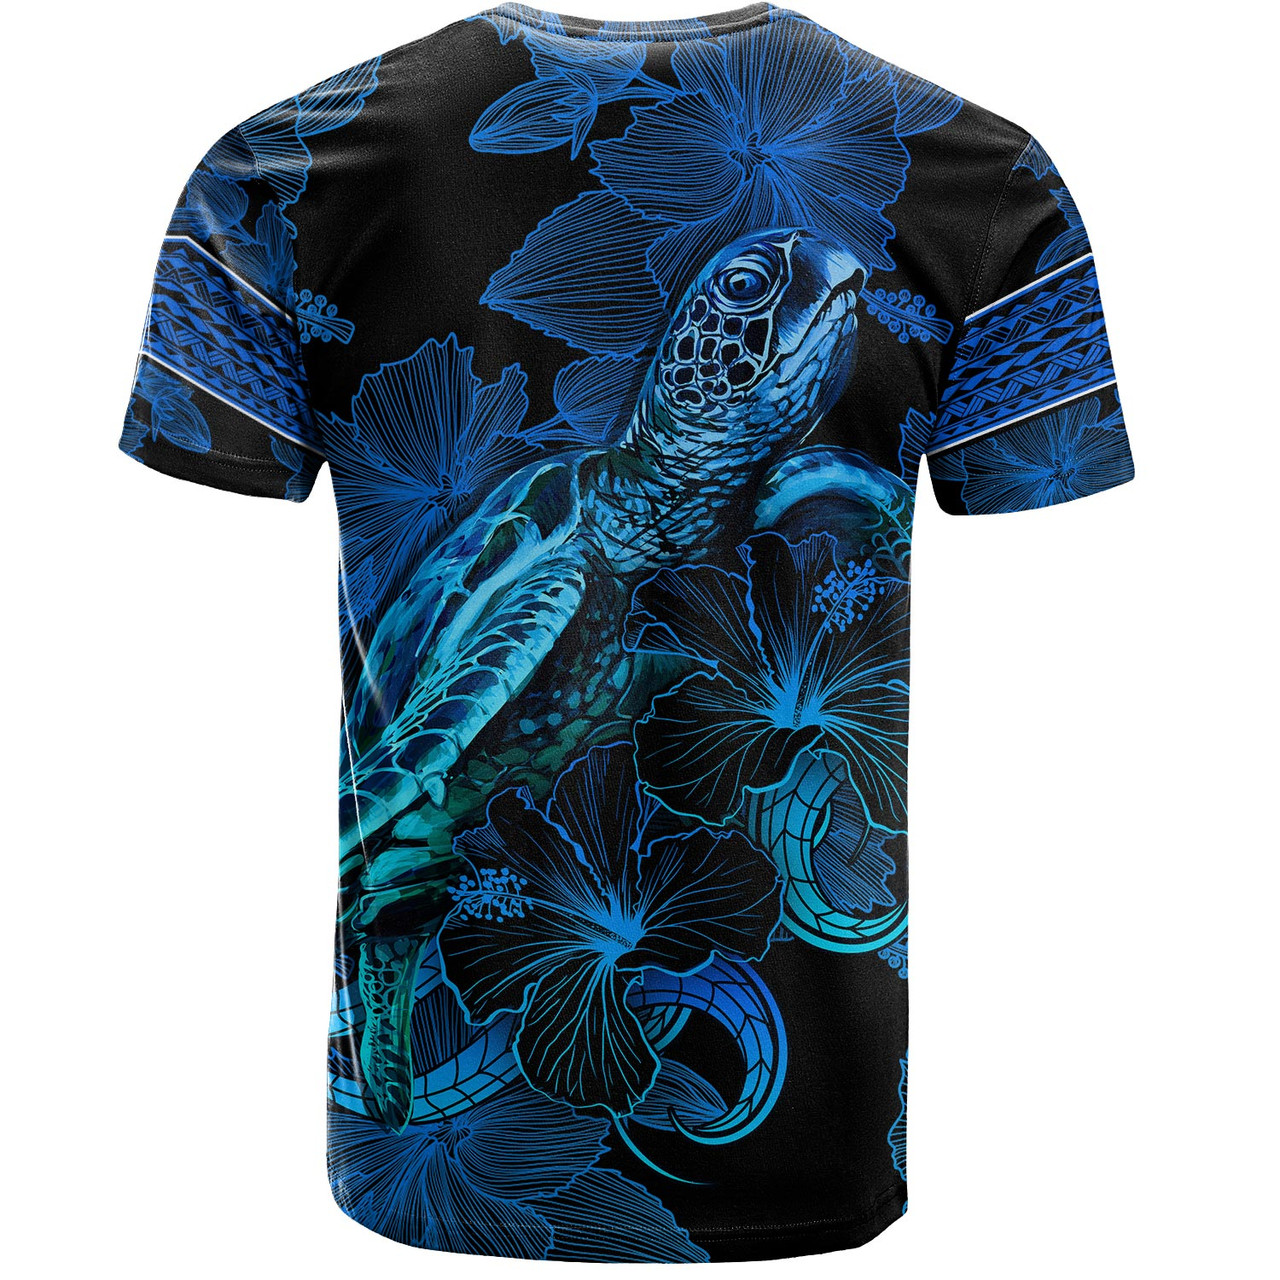 French Polynesia T-Shirt Sea Turtle With Blooming Hibiscus Flowers Tribal Blue